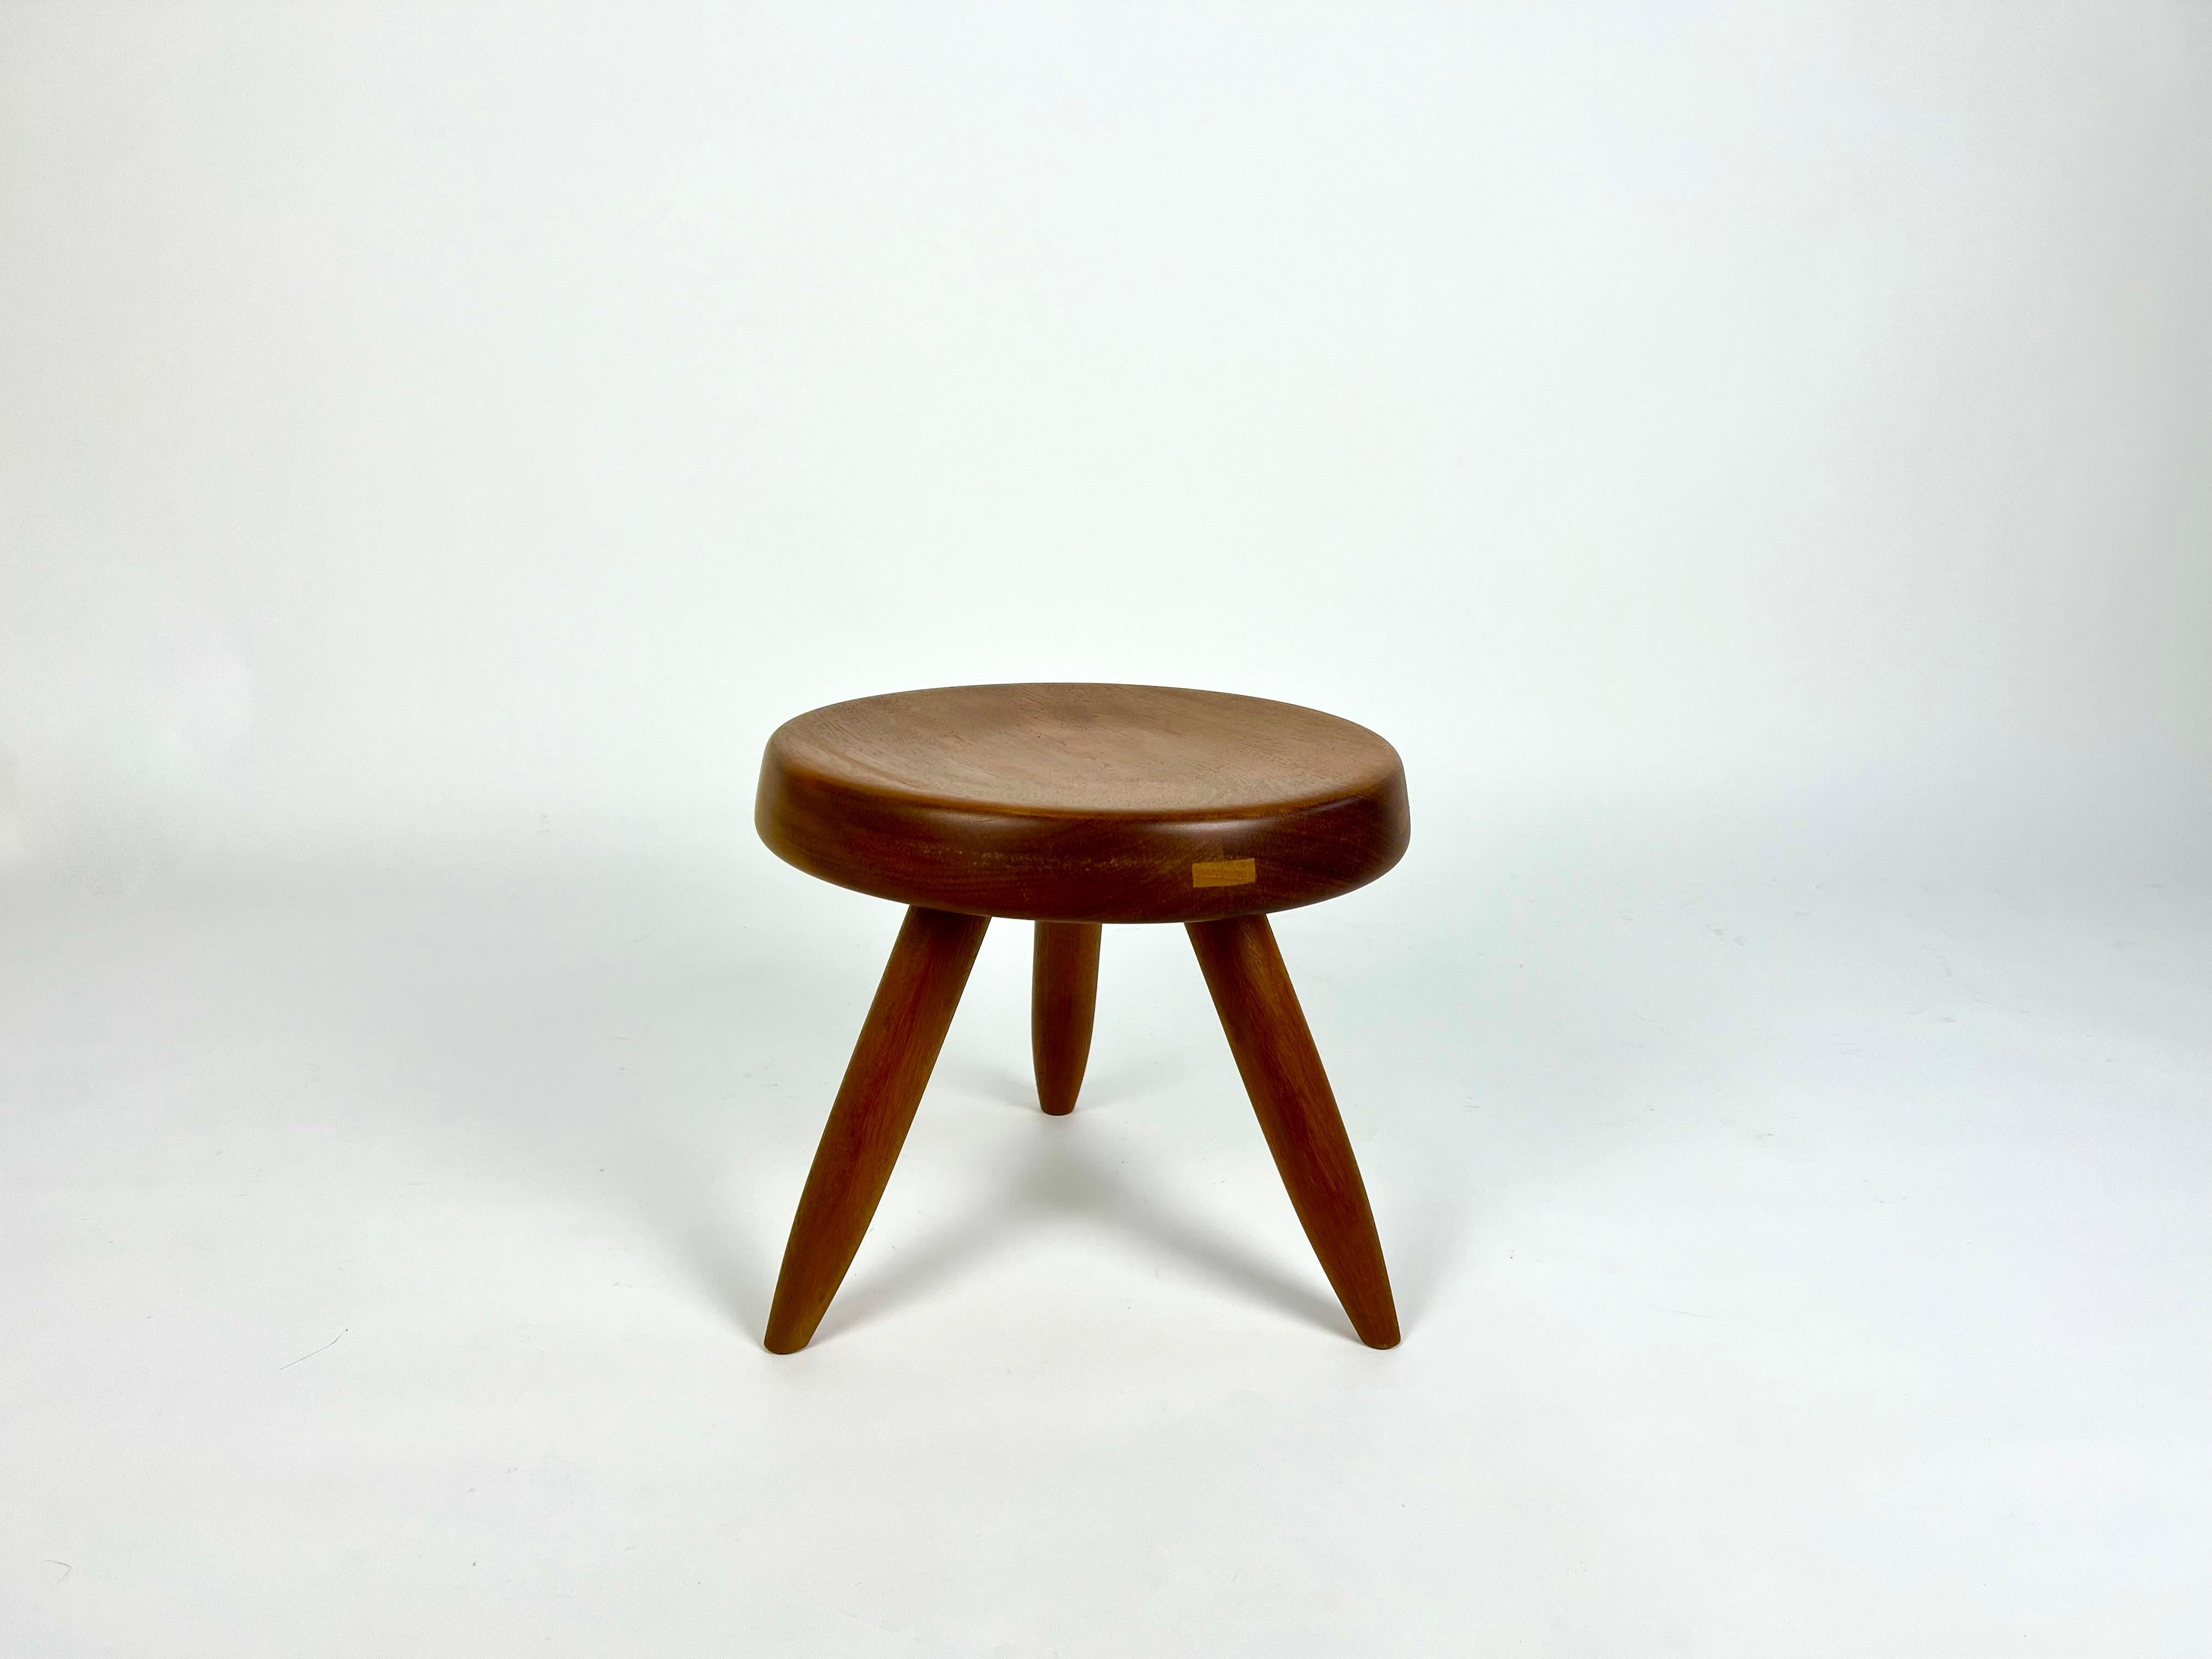 Berger low stool in mahogany, Charlotte Perriand 6